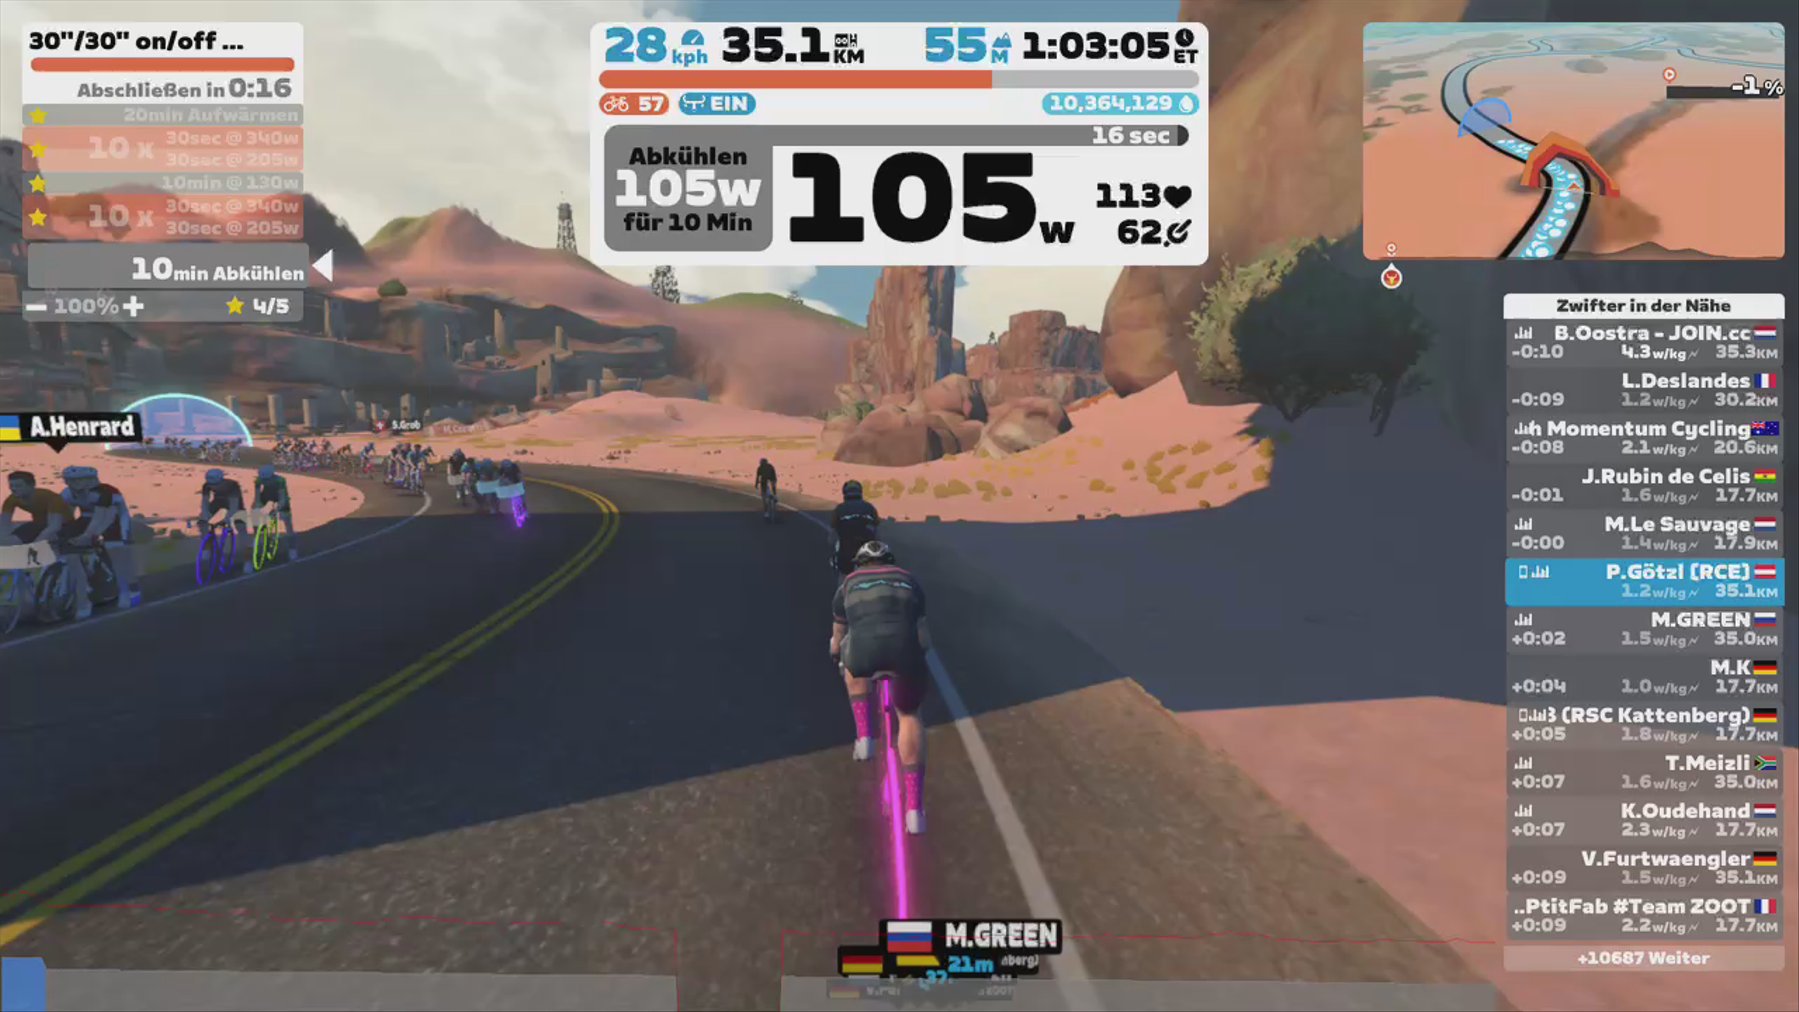 Zwift - 30''/30'' on/off Vo2max in Watopia